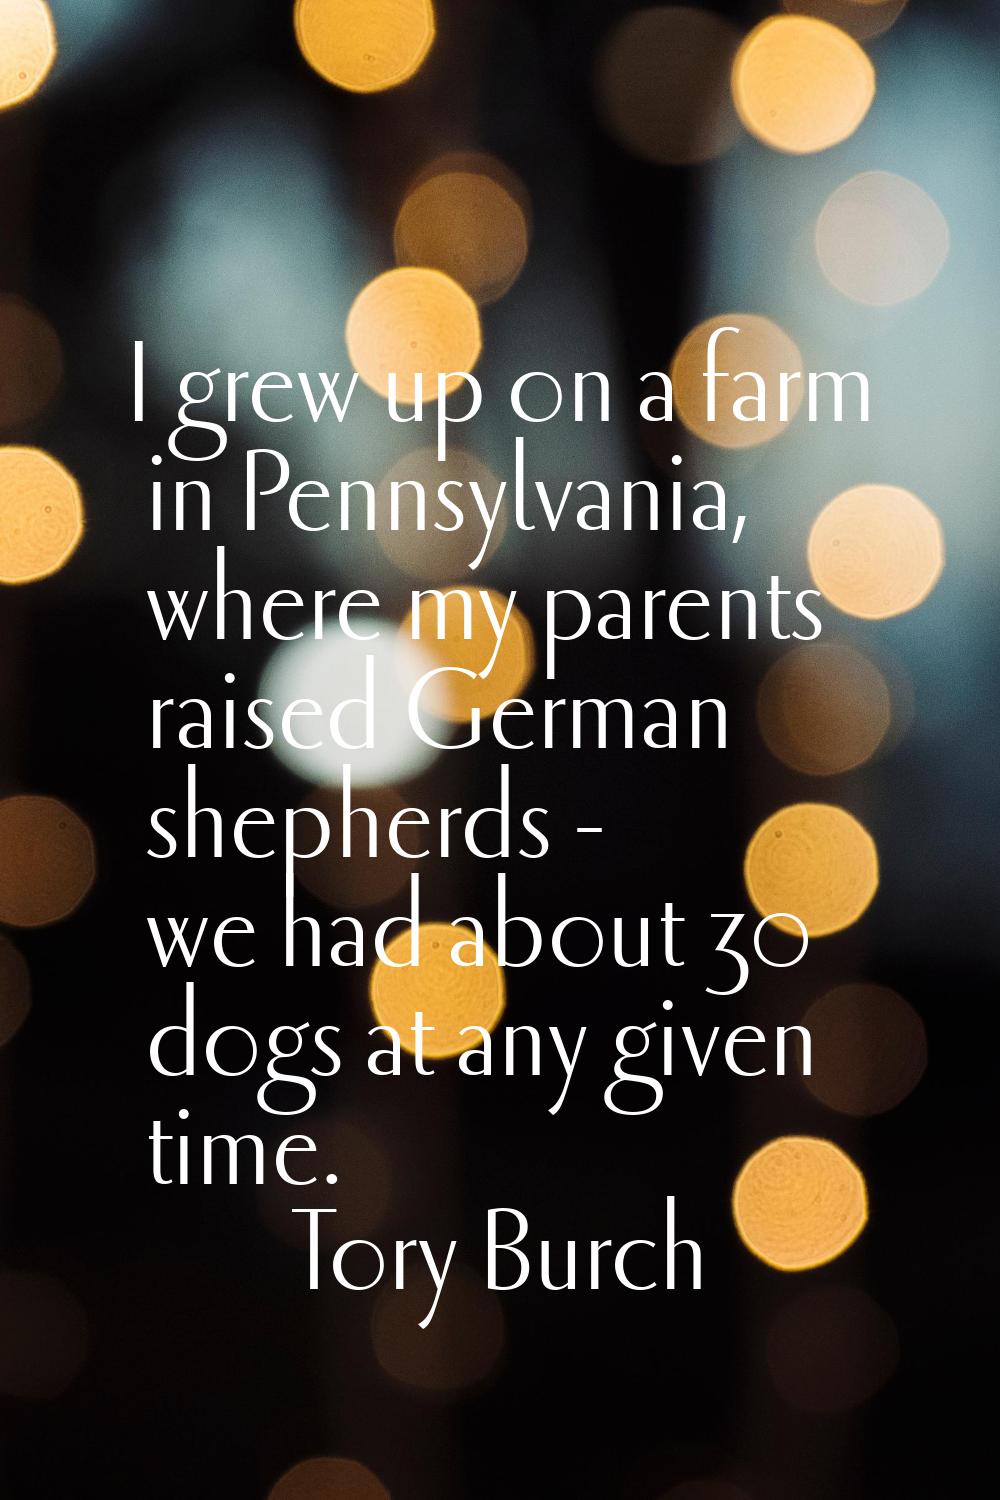 I grew up on a farm in Pennsylvania, where my parents raised German shepherds - we had about 30 dog